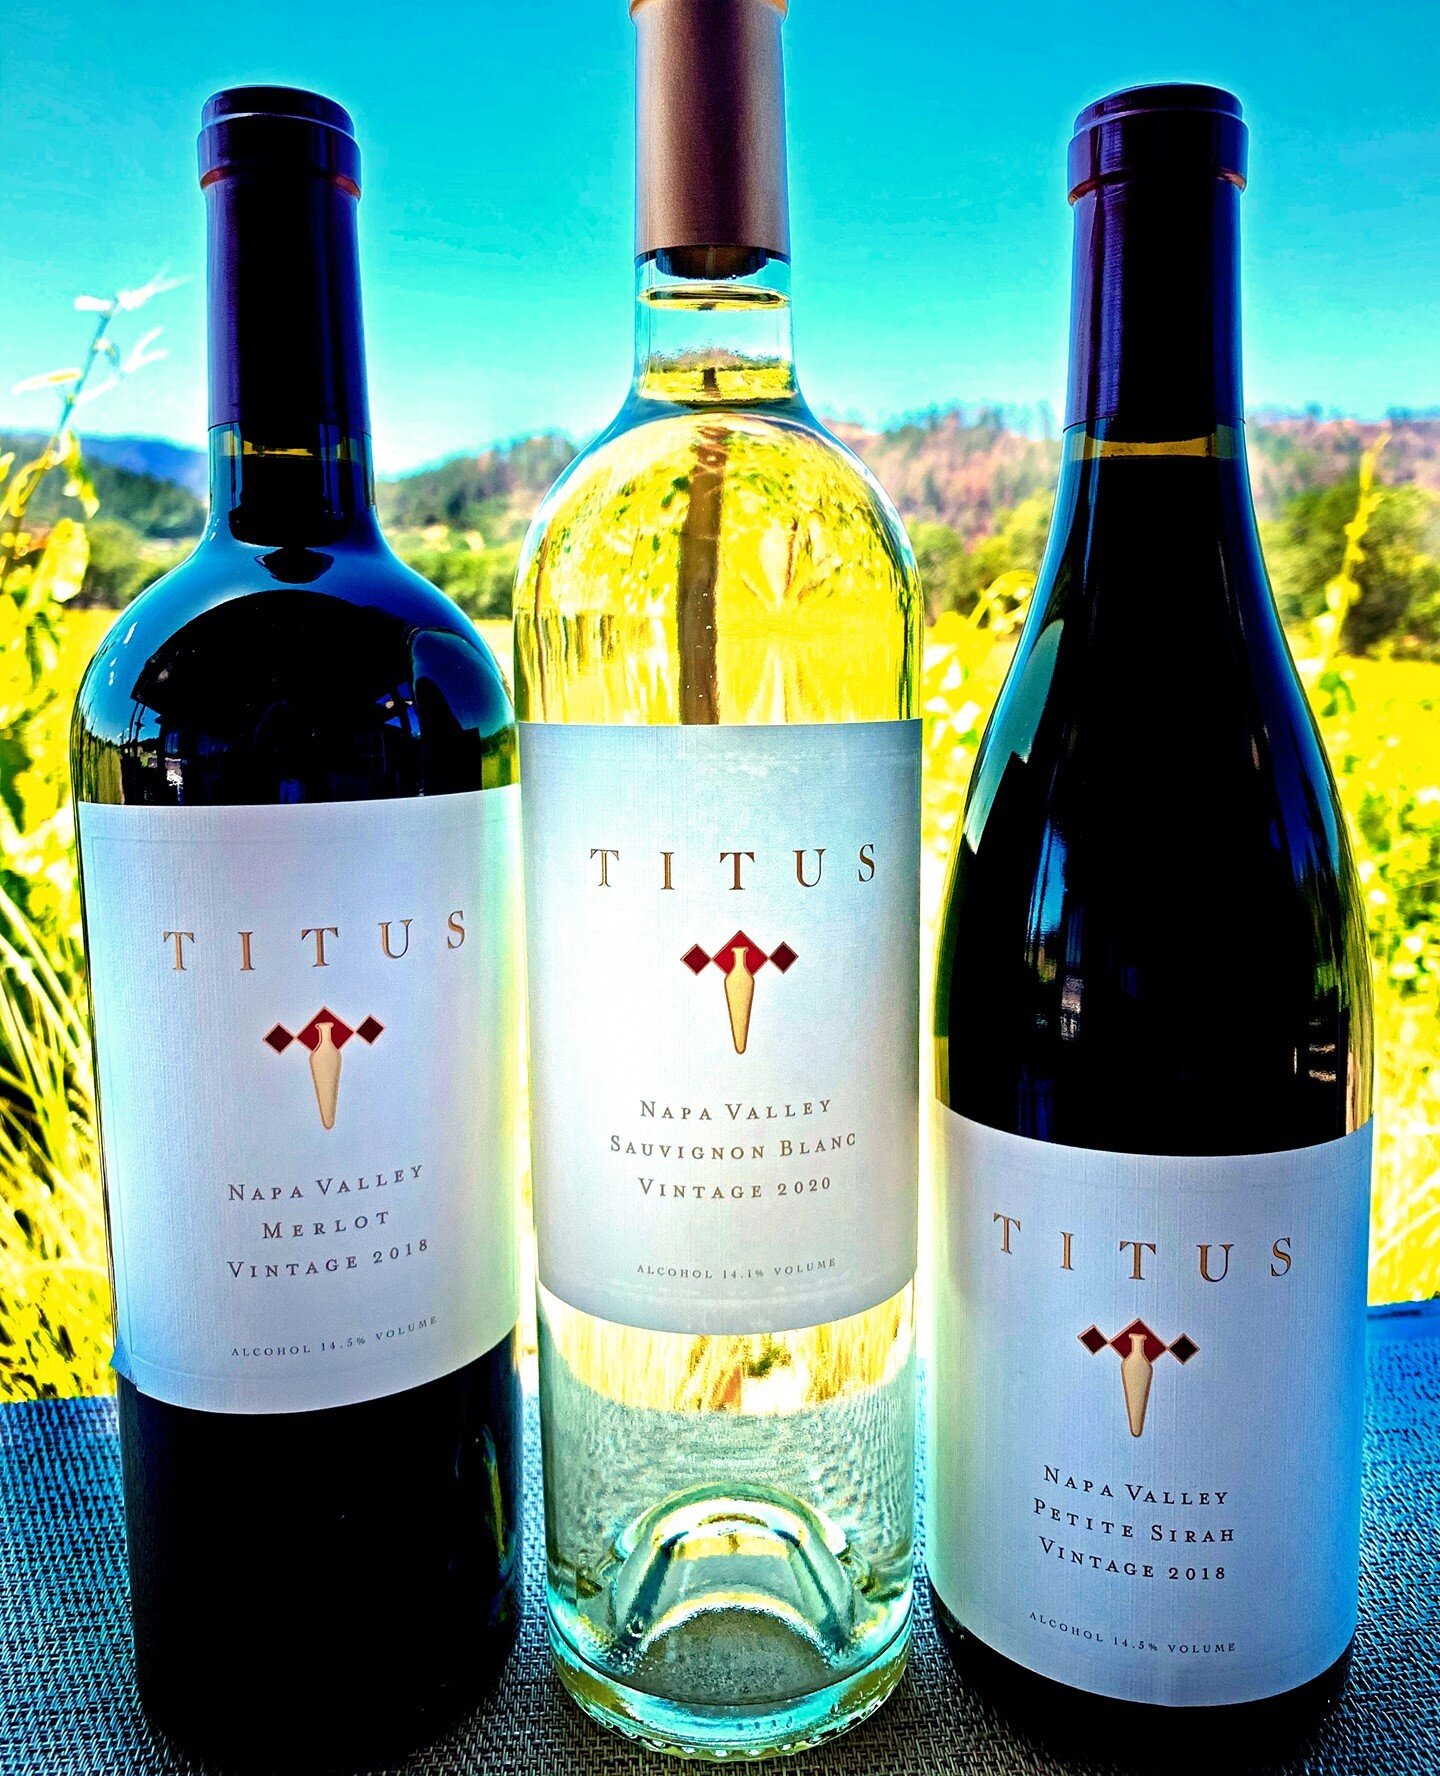 ⁠What could be better than a delicious lobster and wine pairing?  We're excited to partner with @titus_vineyards to offer three wonderful vinos for our St. Helena &quot;First Crack&quot; At-Home Lobster Dinner on June 18th!  Quantities are limited an